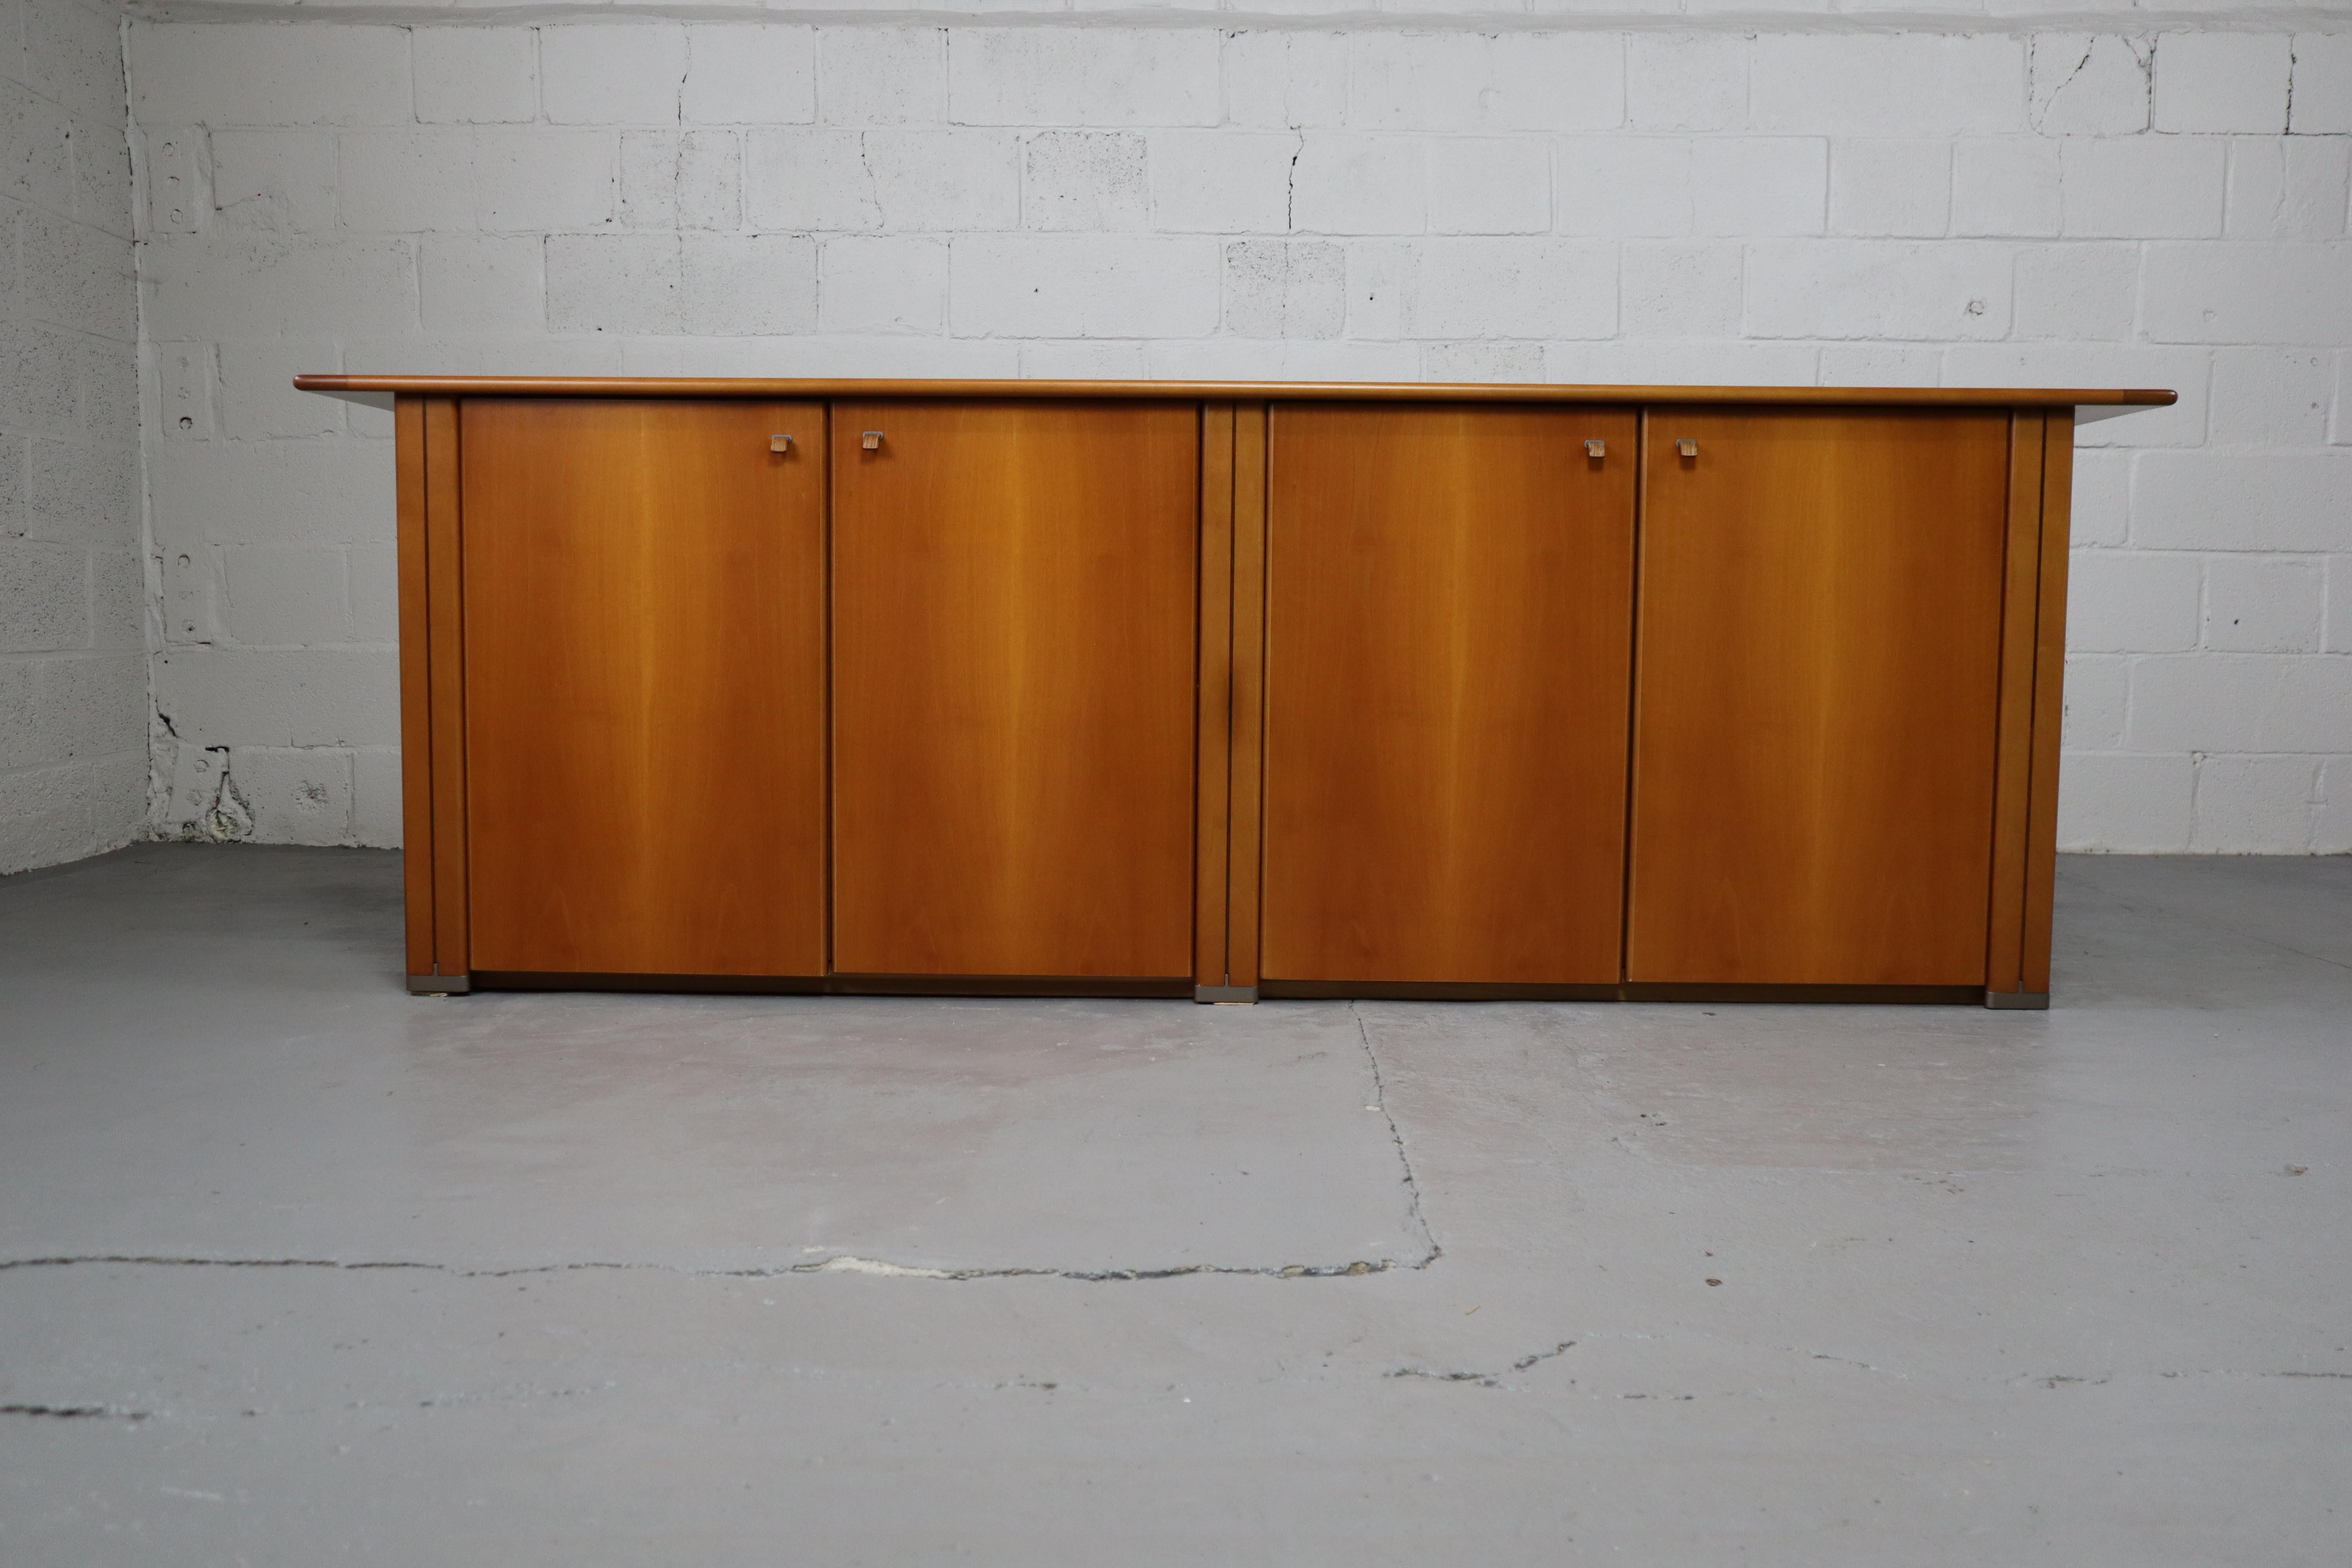 Vintage sideboard in walnut by Molteni & C Italy, 1990's.
Molteni & C is a well-known Italian design brand of furniture with its own typical style
The cabinet is made of walnut wood with some details in tropical hardwood.
Dxhxl: 42x76x226 cm